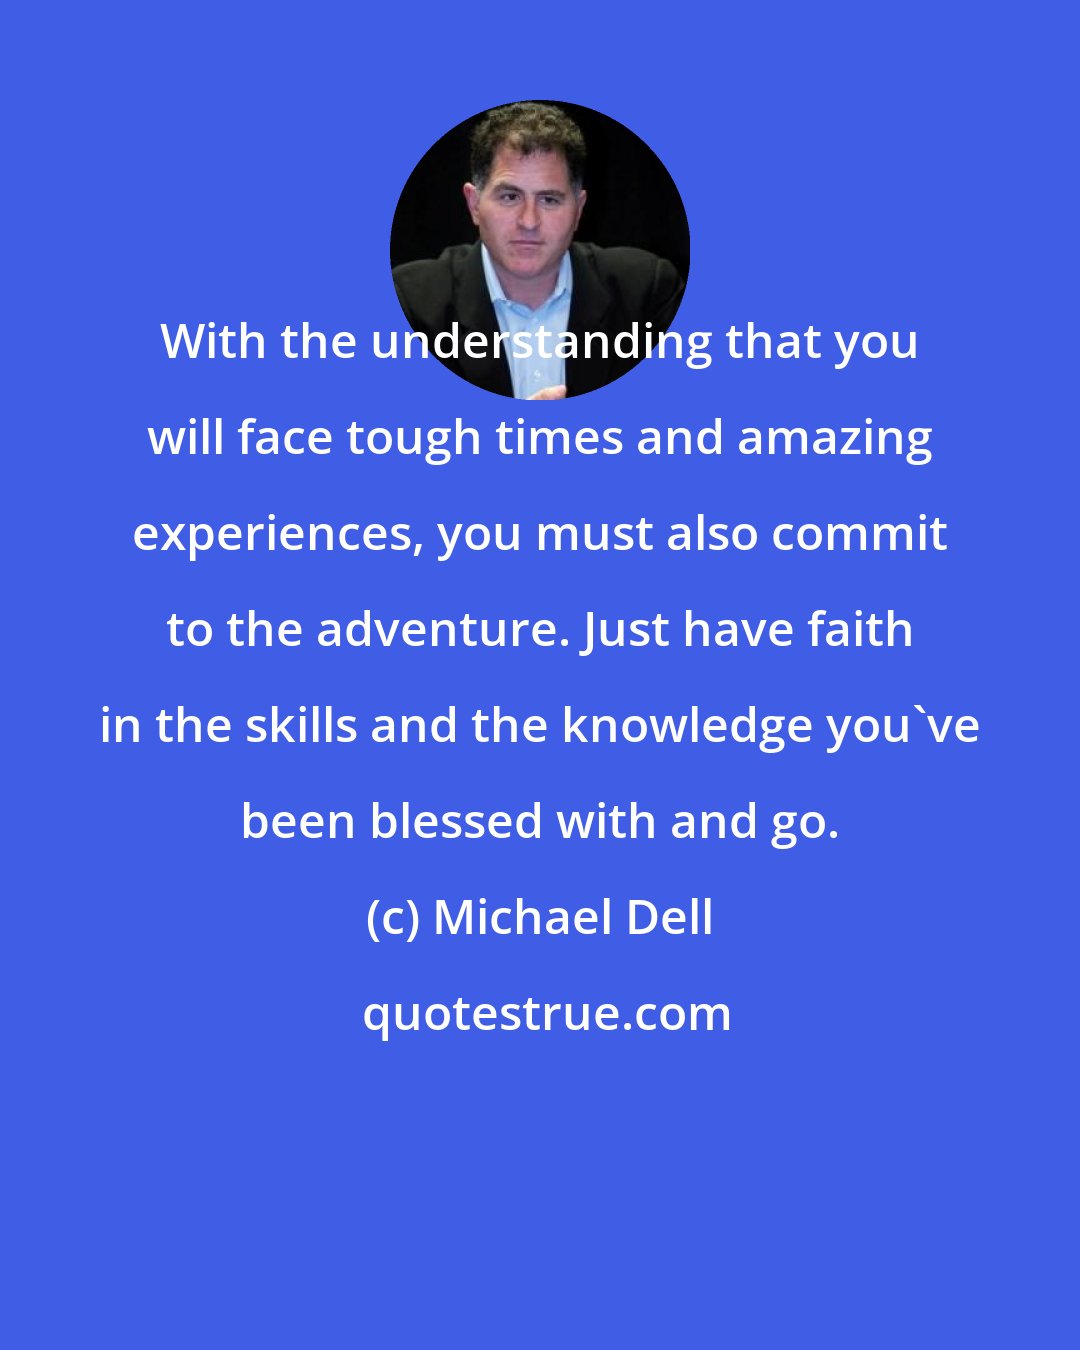 Michael Dell: With the understanding that you will face tough times and amazing experiences, you must also commit to the adventure. Just have faith in the skills and the knowledge you've been blessed with and go.